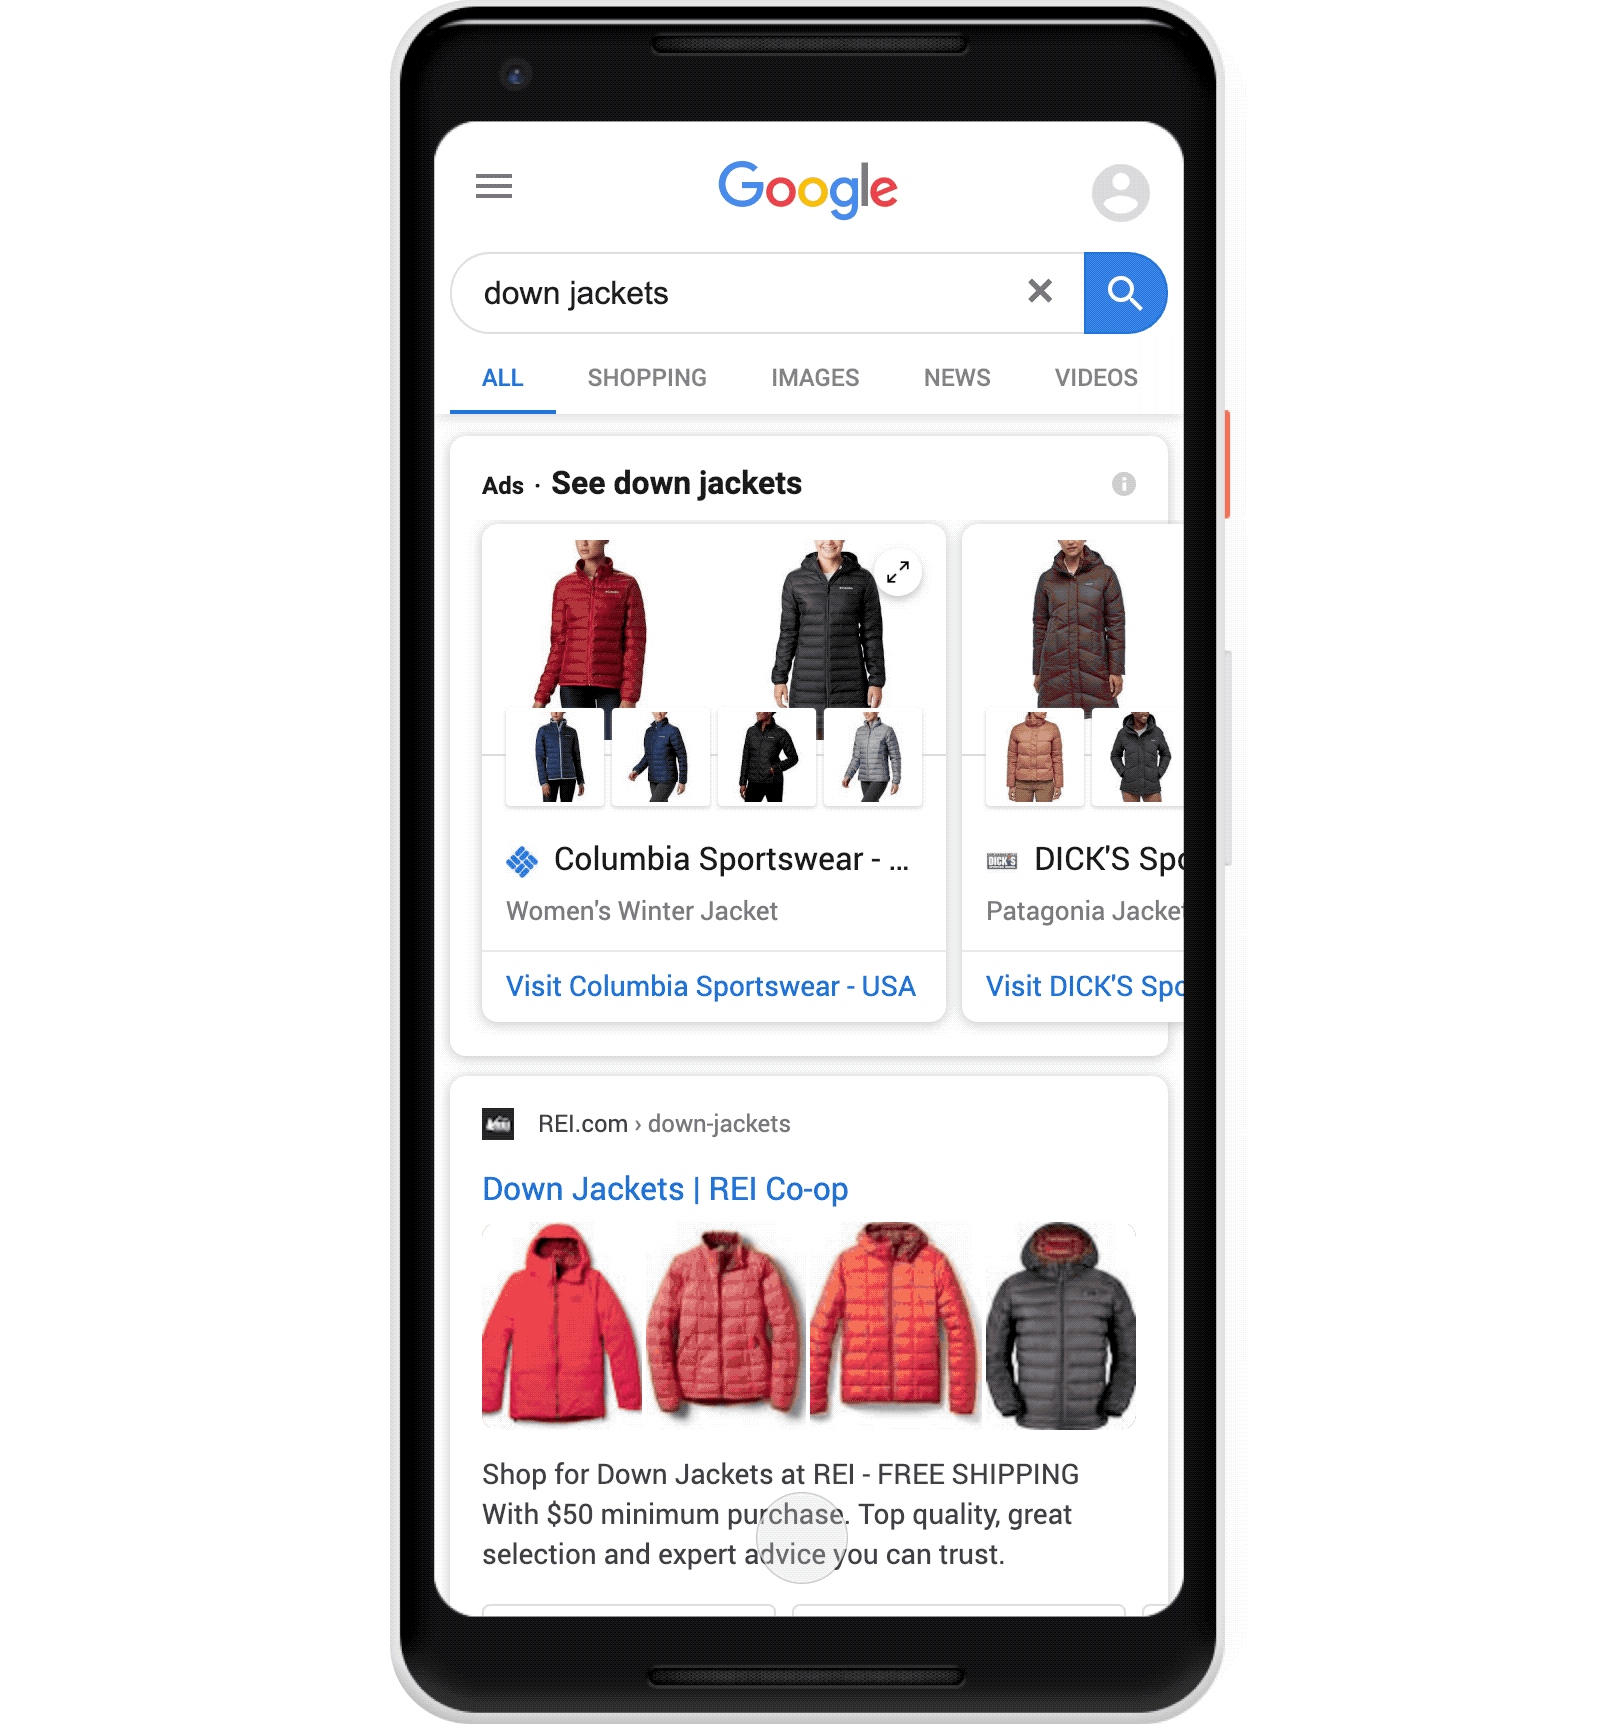 Google rolls out Organic Popular Products listings